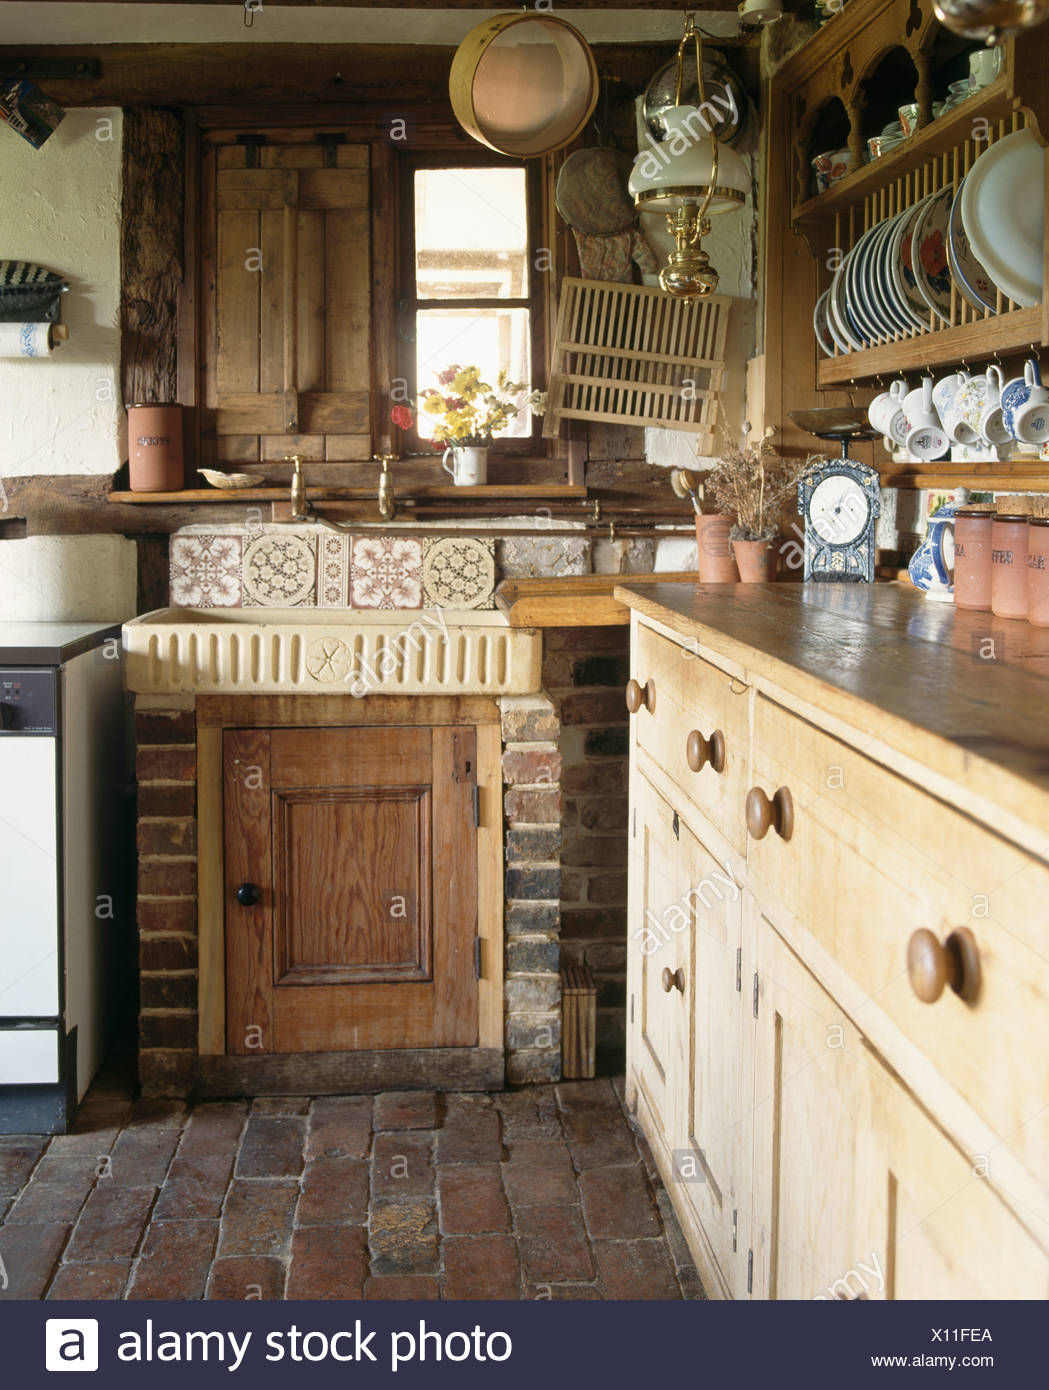 Earthenware Sink And Antique Pine Dresser In Small Cottage Kitchen